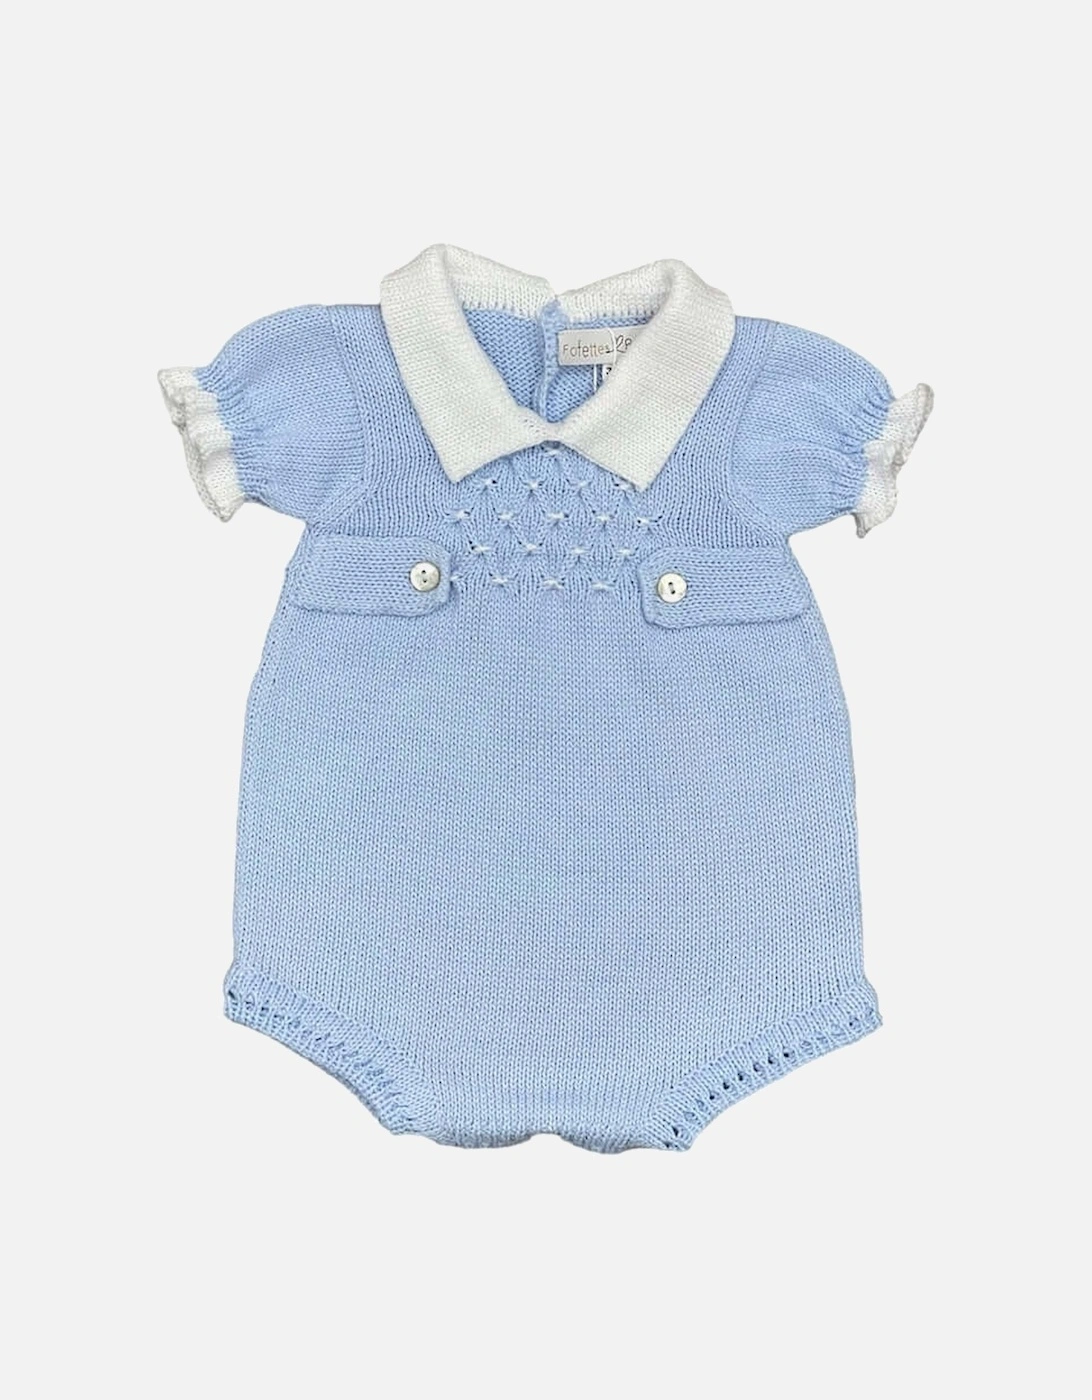 Fofettes Baby Boy's Baby Boys Blue Knitted Smocked Romper - White - Size: 3-6 months